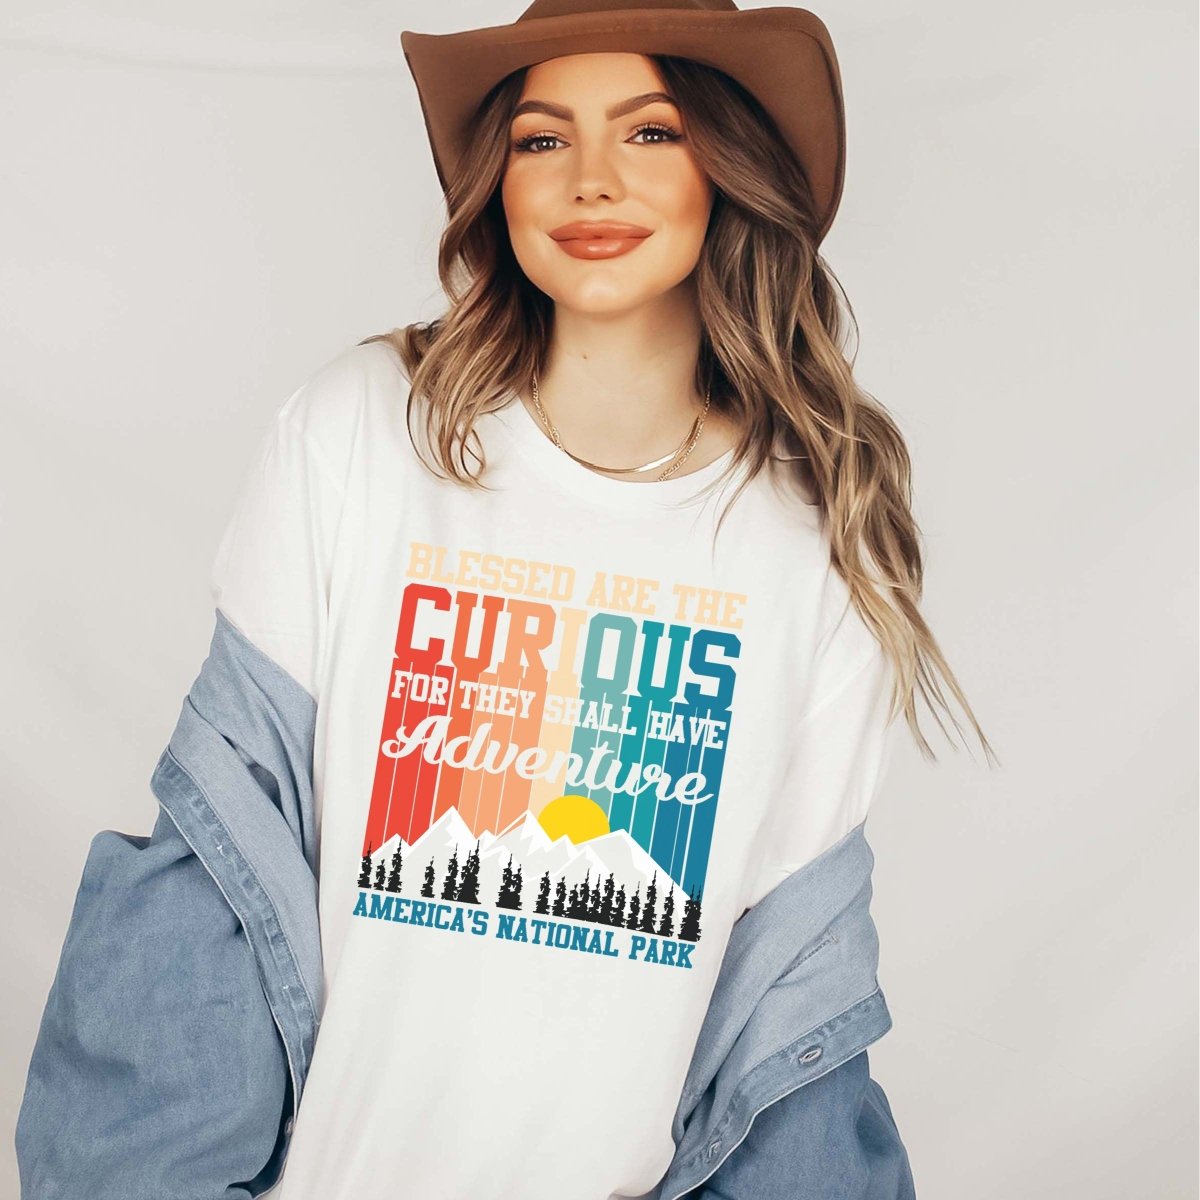 Blessed are the Curious Tee - Limeberry Designs